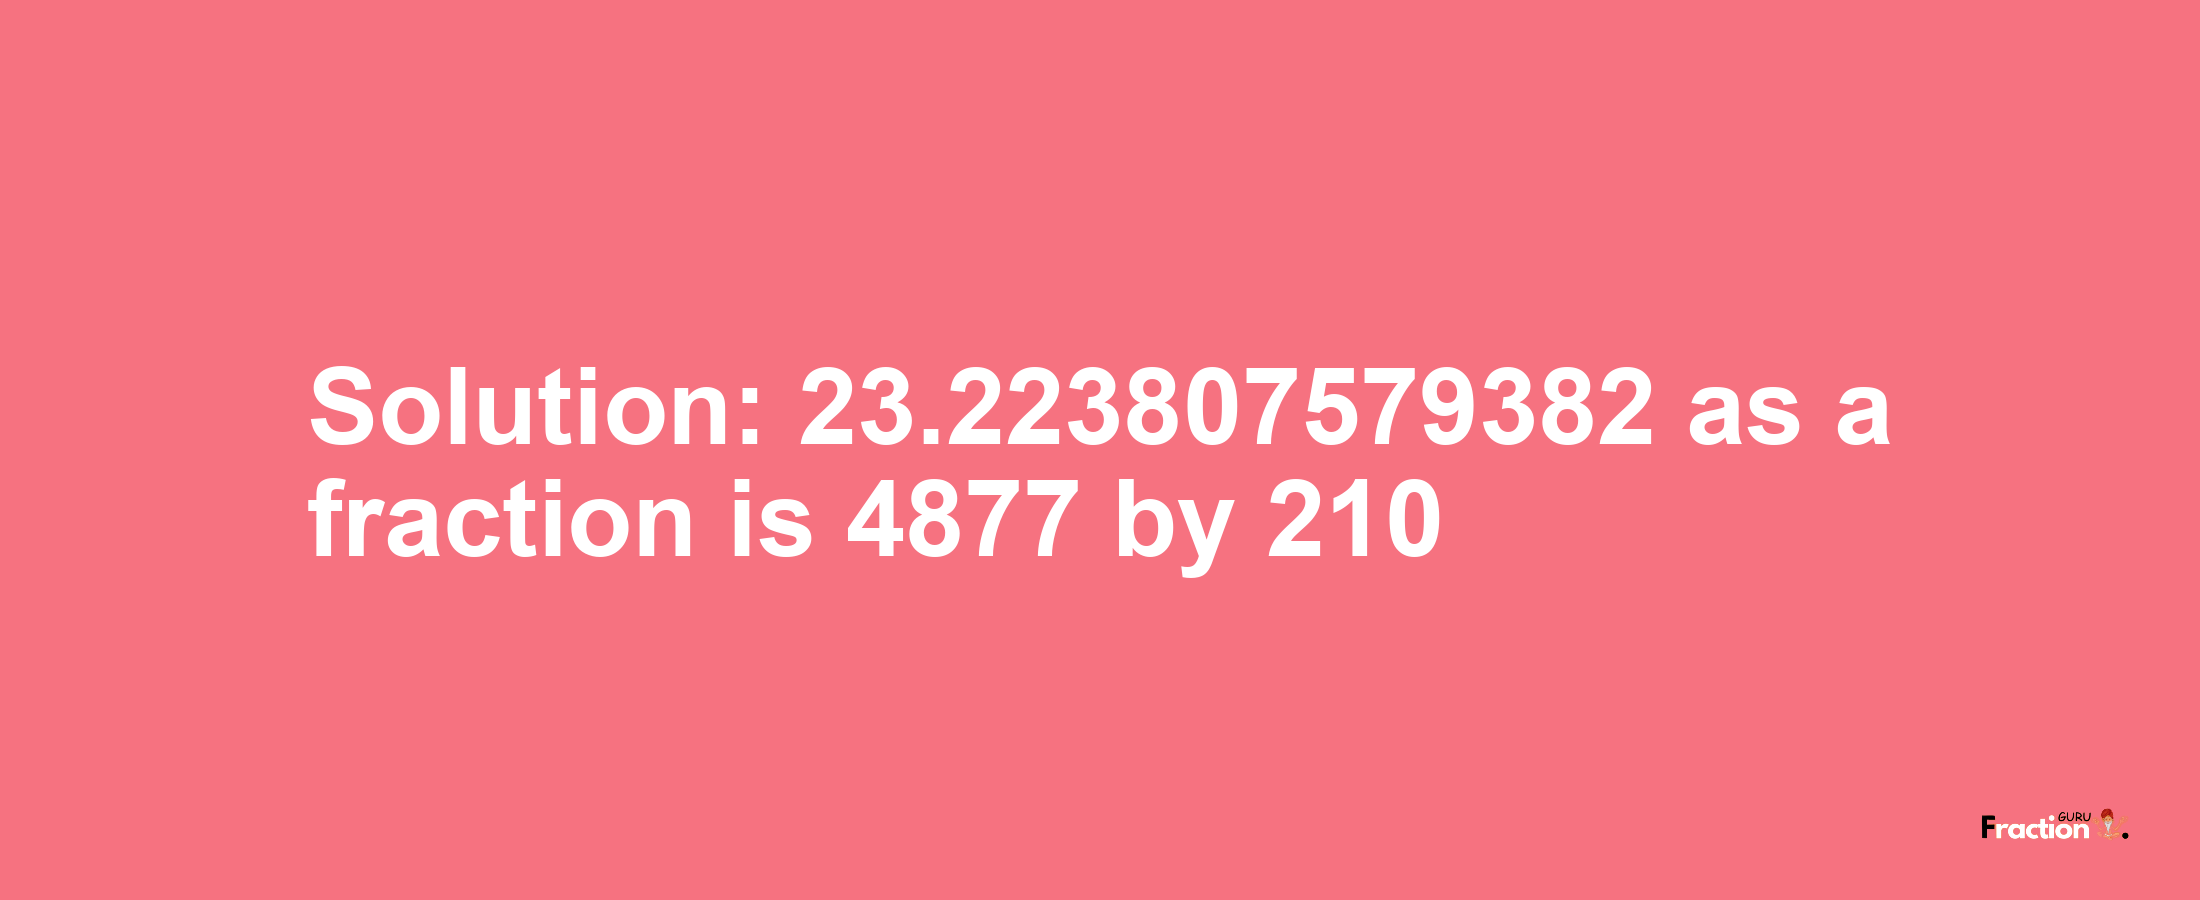 Solution:23.223807579382 as a fraction is 4877/210